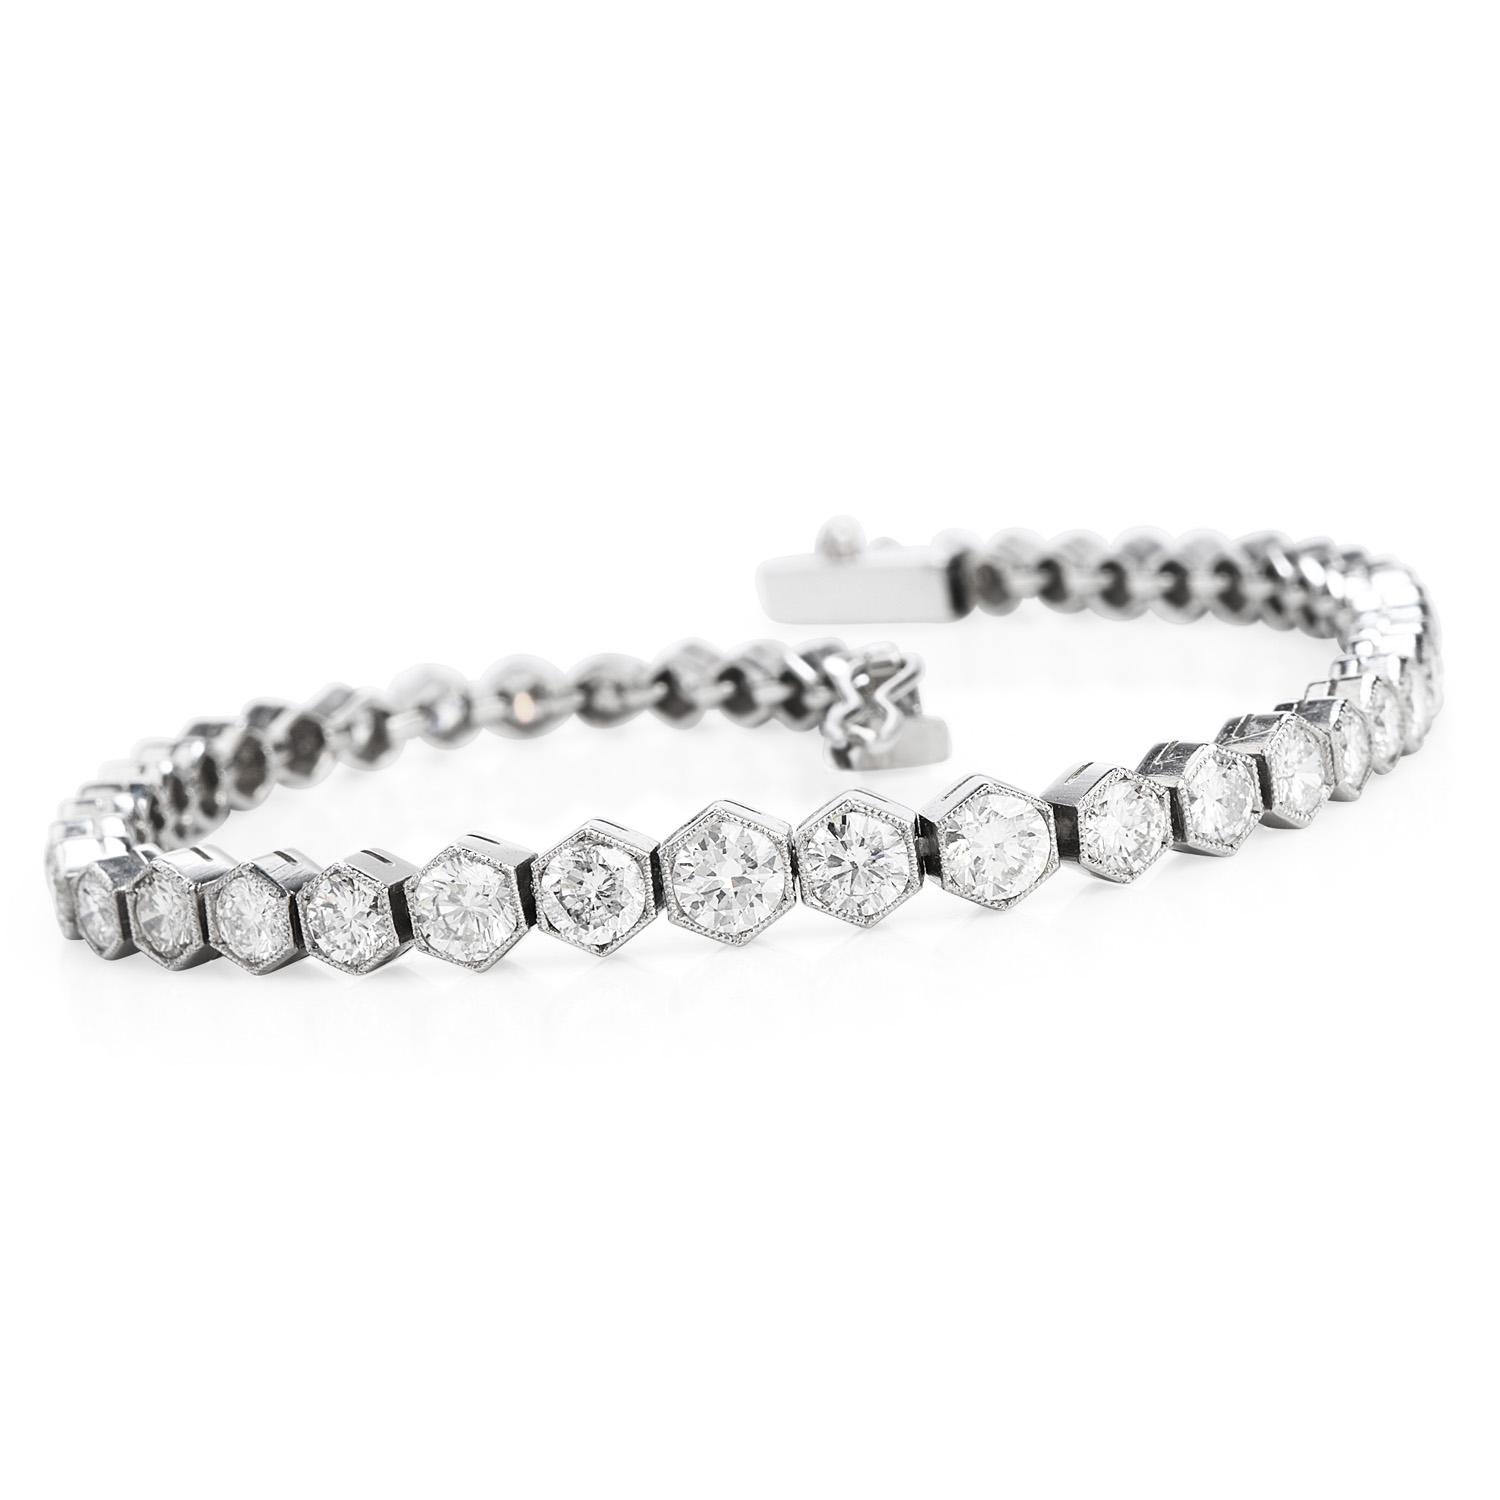 Crafted in solid Platinum, the incredible sparkle on this Diamond bracelet comes from its 49 Genuine Round cut Diamonds with a total carat weight of 5.34cts, G-H color, VS1-VS2 clarity, all prong set. The Modern touch on this piece comes from the